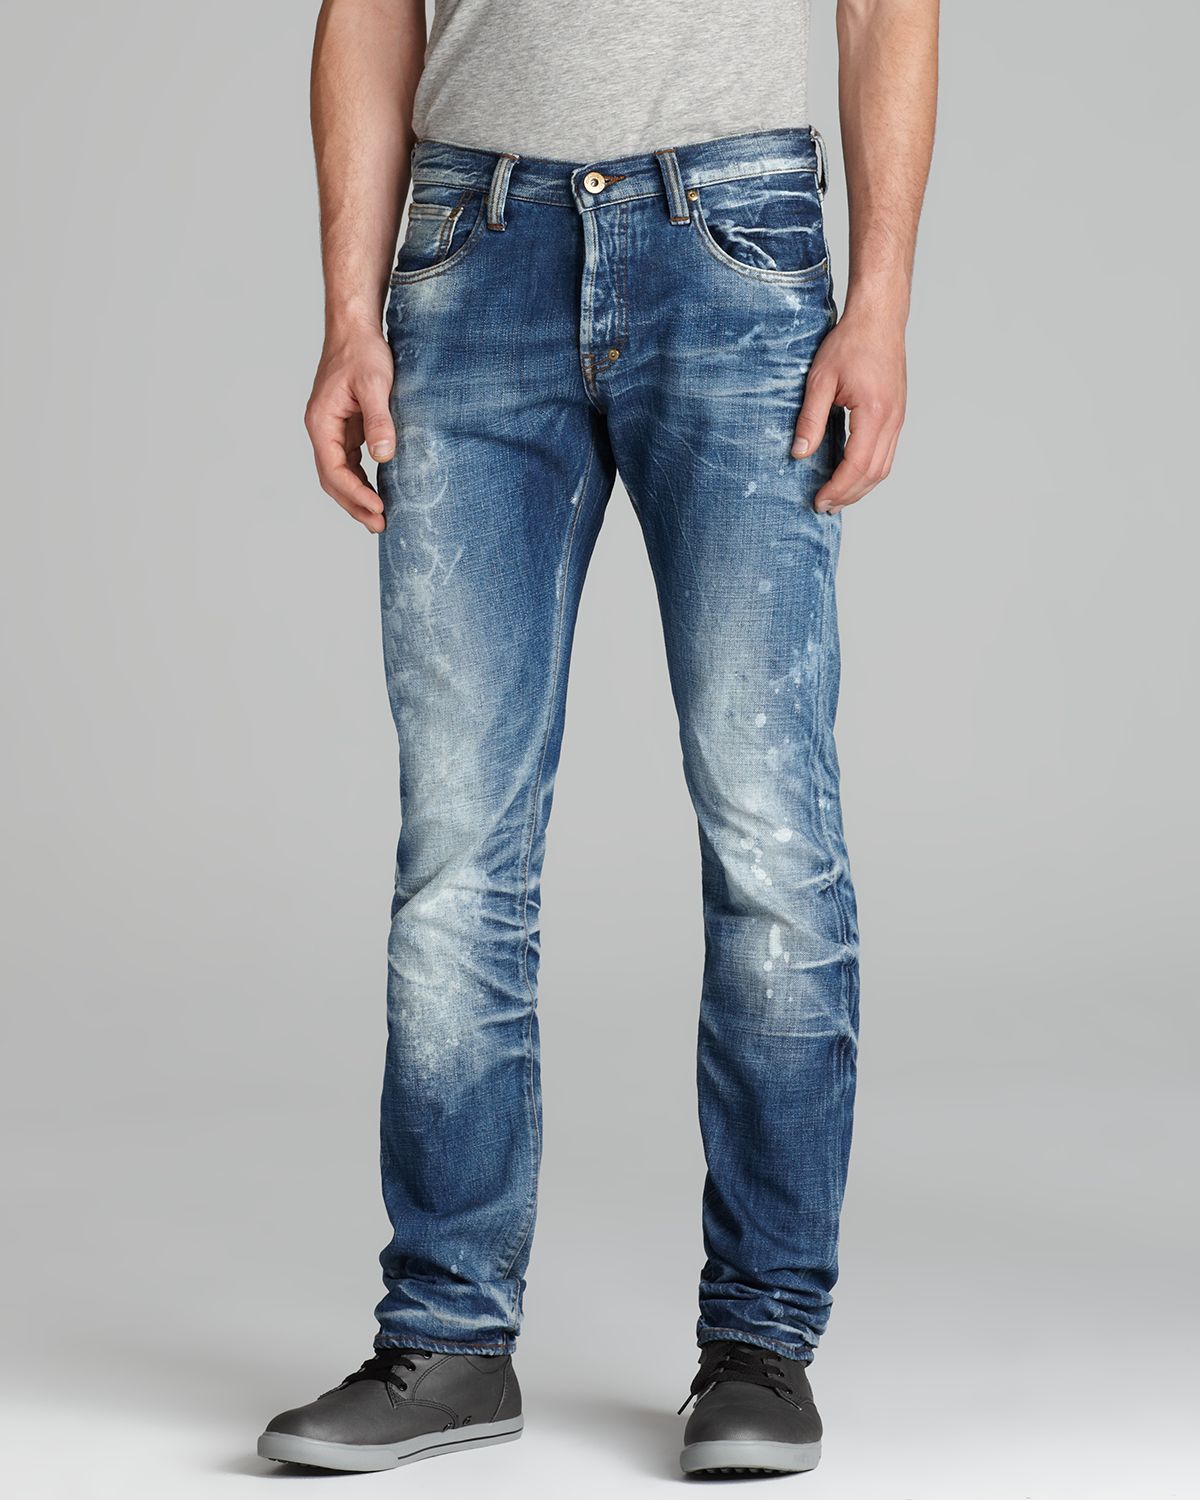 Lyst - Prps Jeans Barracuda Paint Splatter Relaxed Fit in Medium Blue ...